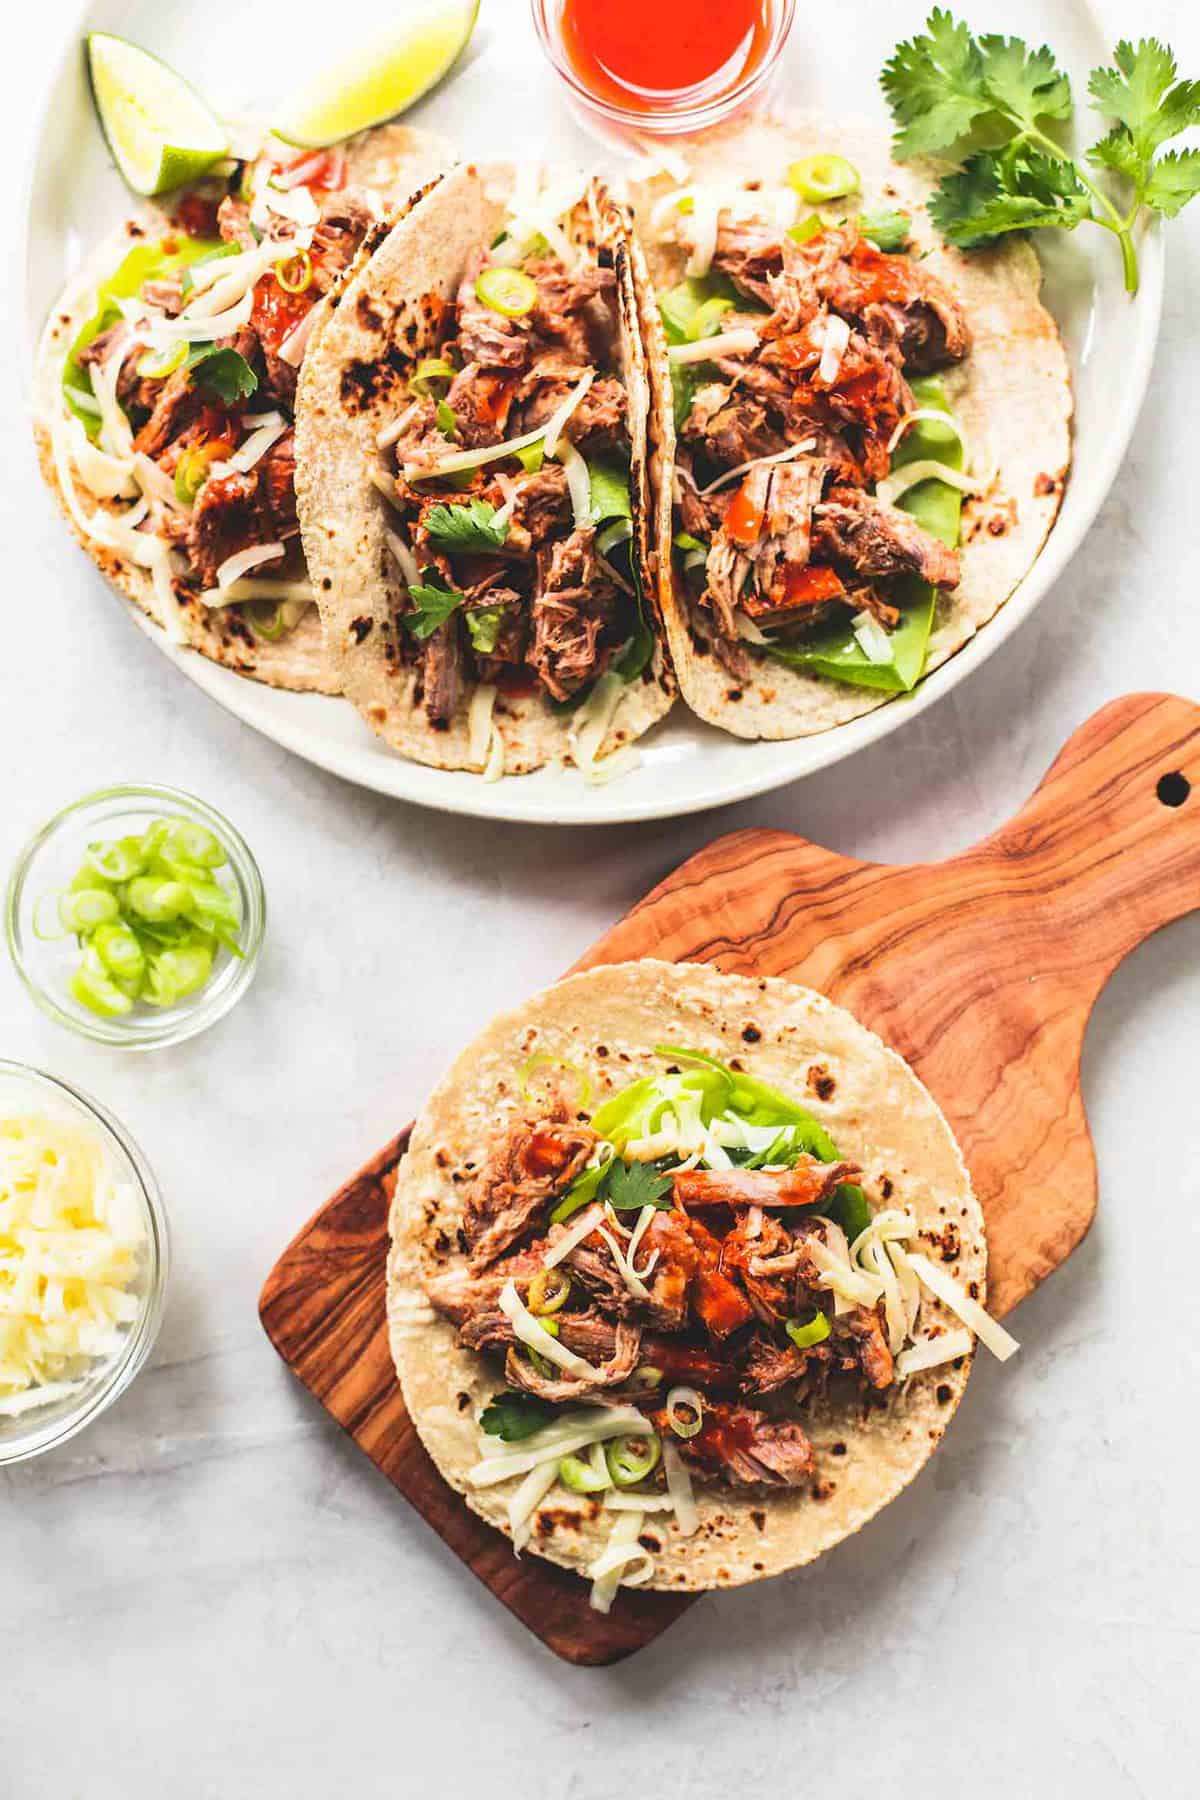 top view of a slow cooker pork taco on a wooden cutting board with bowls of toppings on the side next to a plate of tacos with sauce on the side.